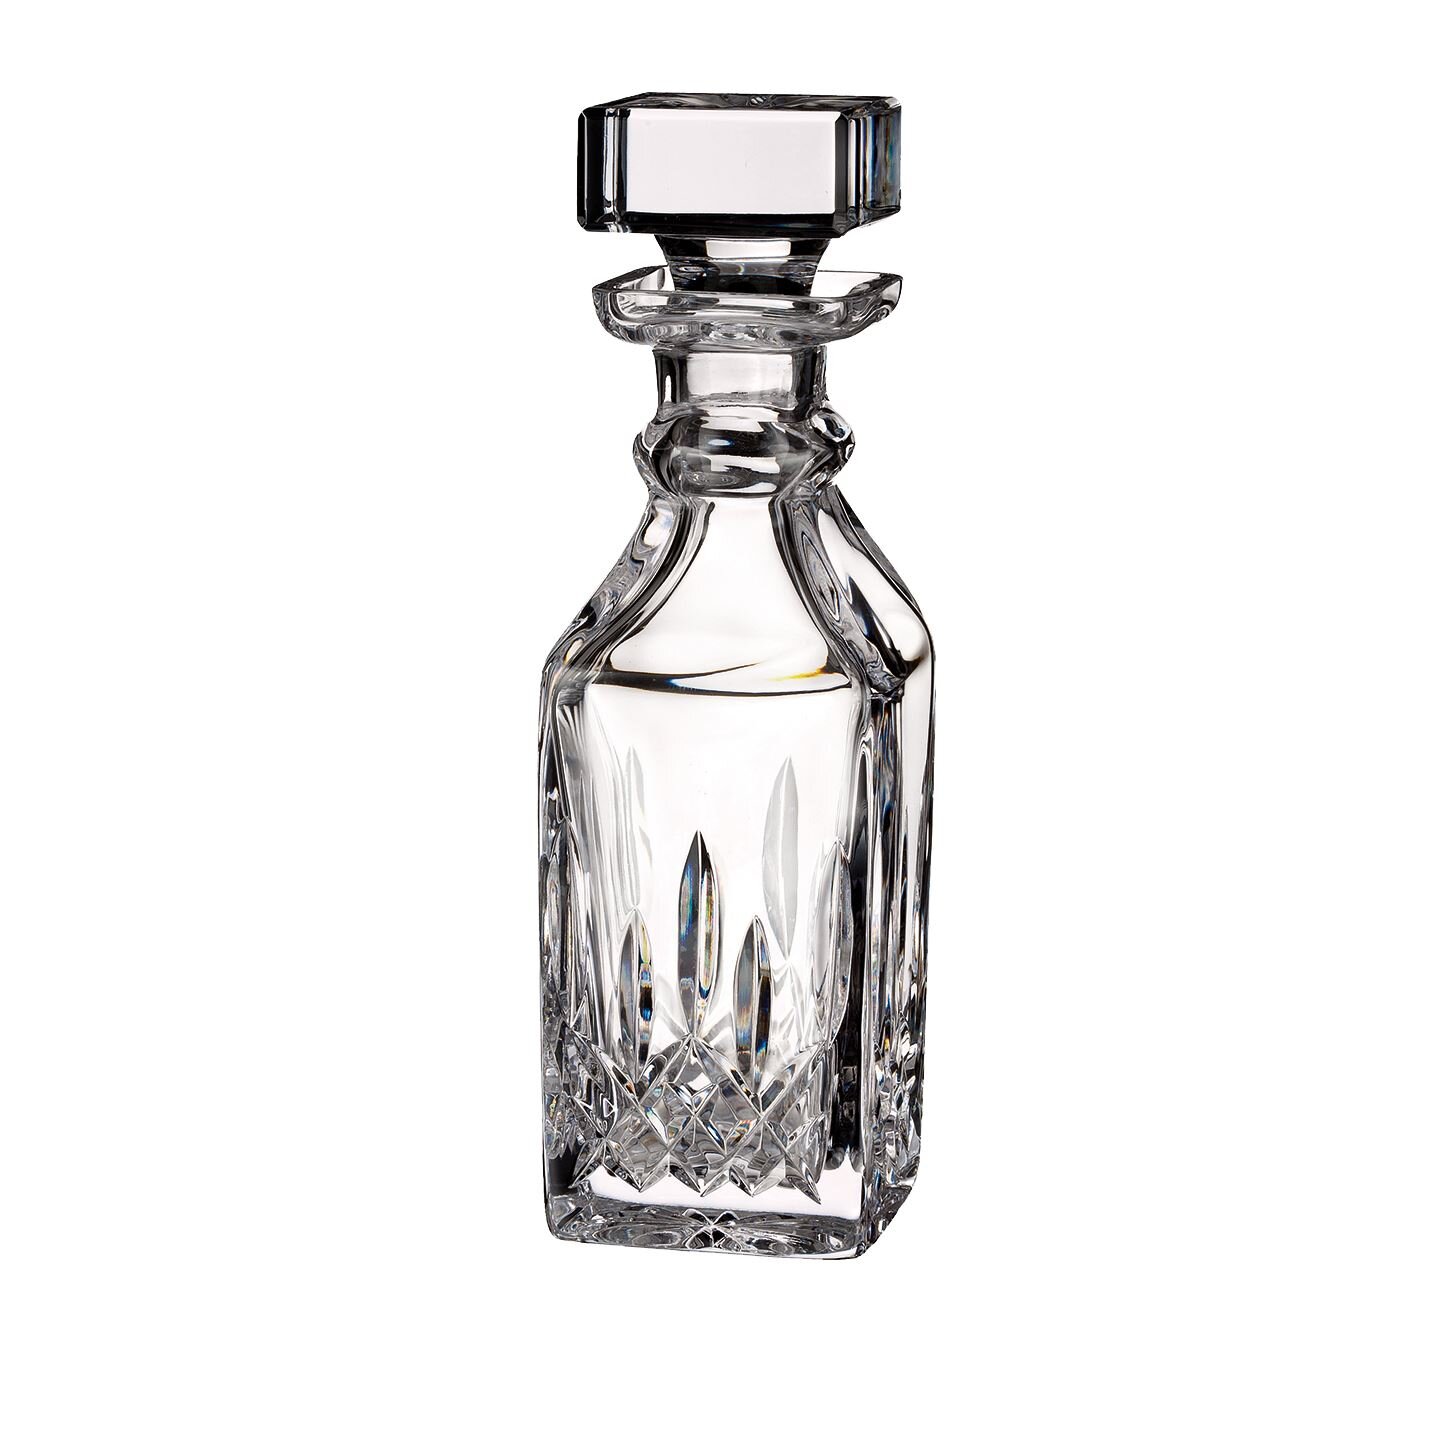 WATERFORD Lismore Brandy Decanter & Stopper